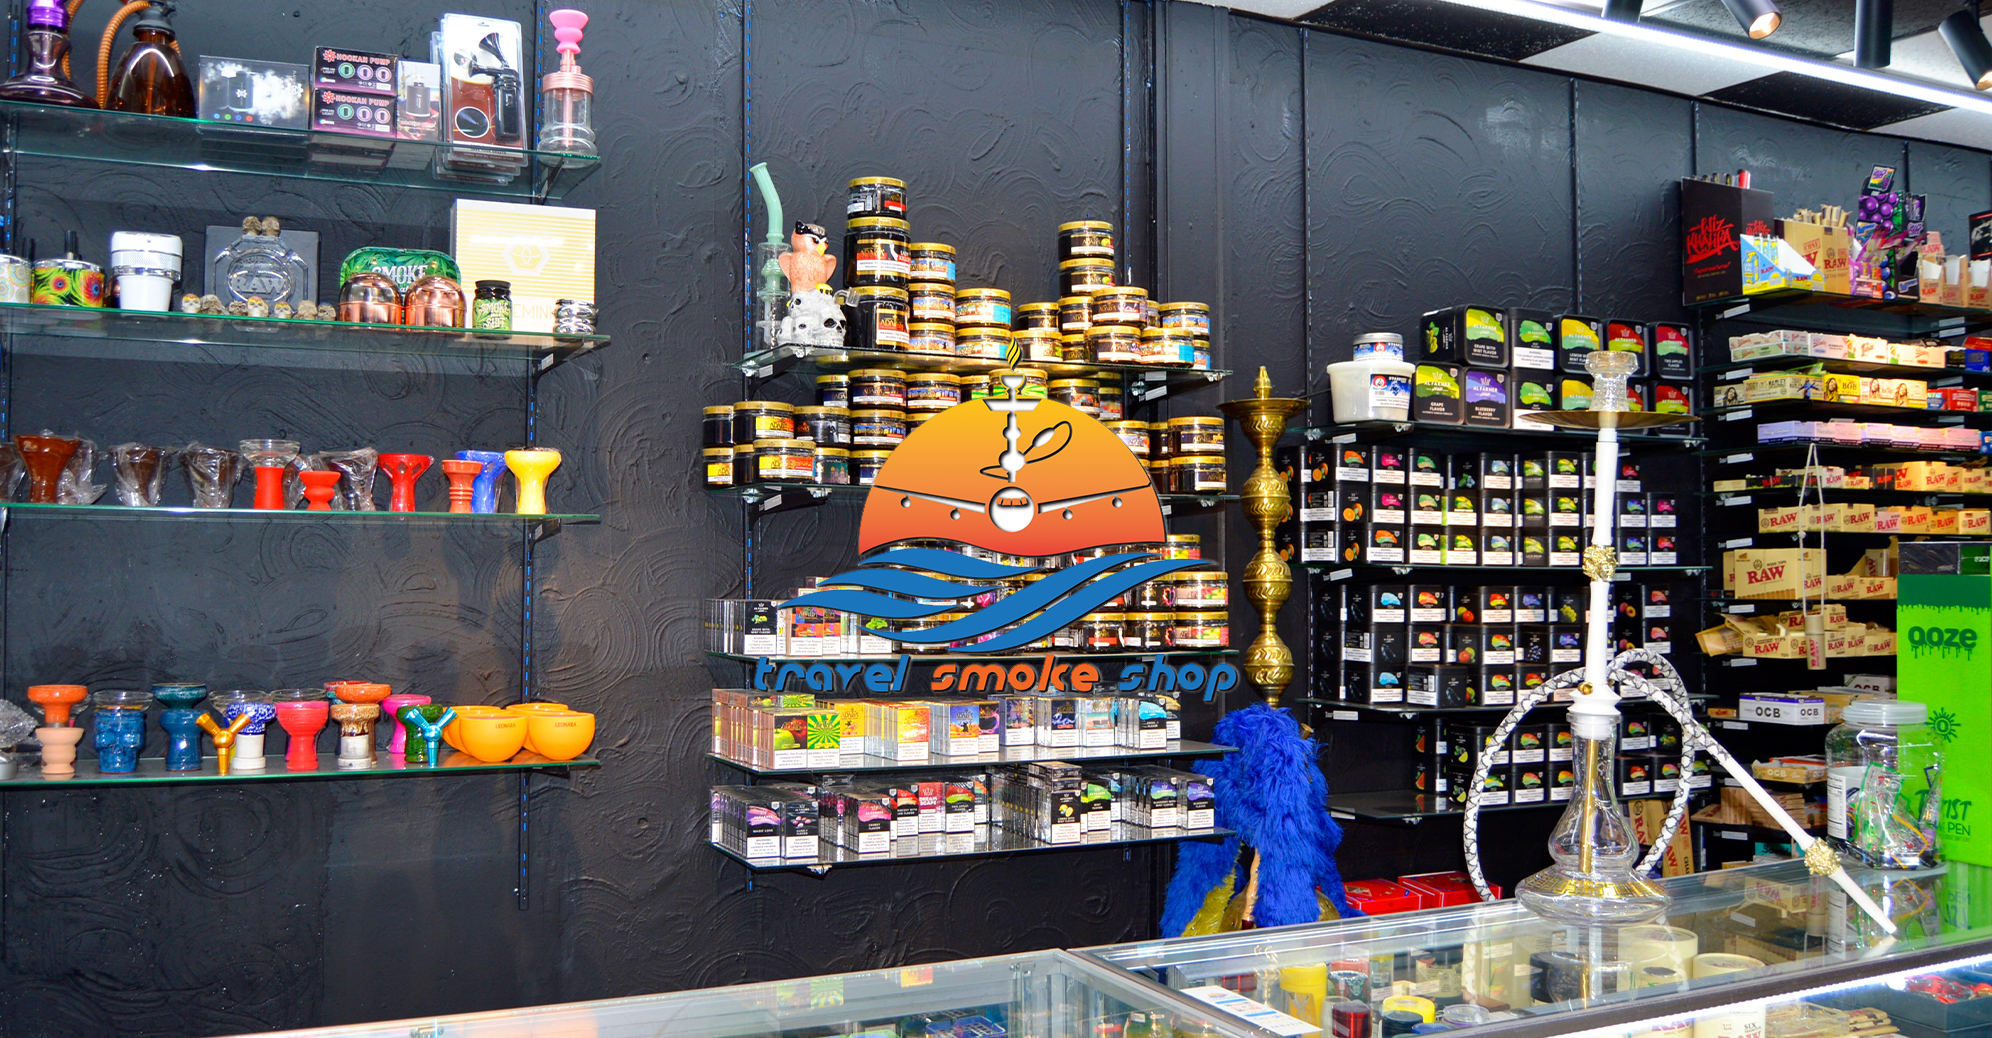 Welcome to Travel Smoke Shop, your one-stop destination for all your tobacco, vaping, and indulgence needs! About Us.